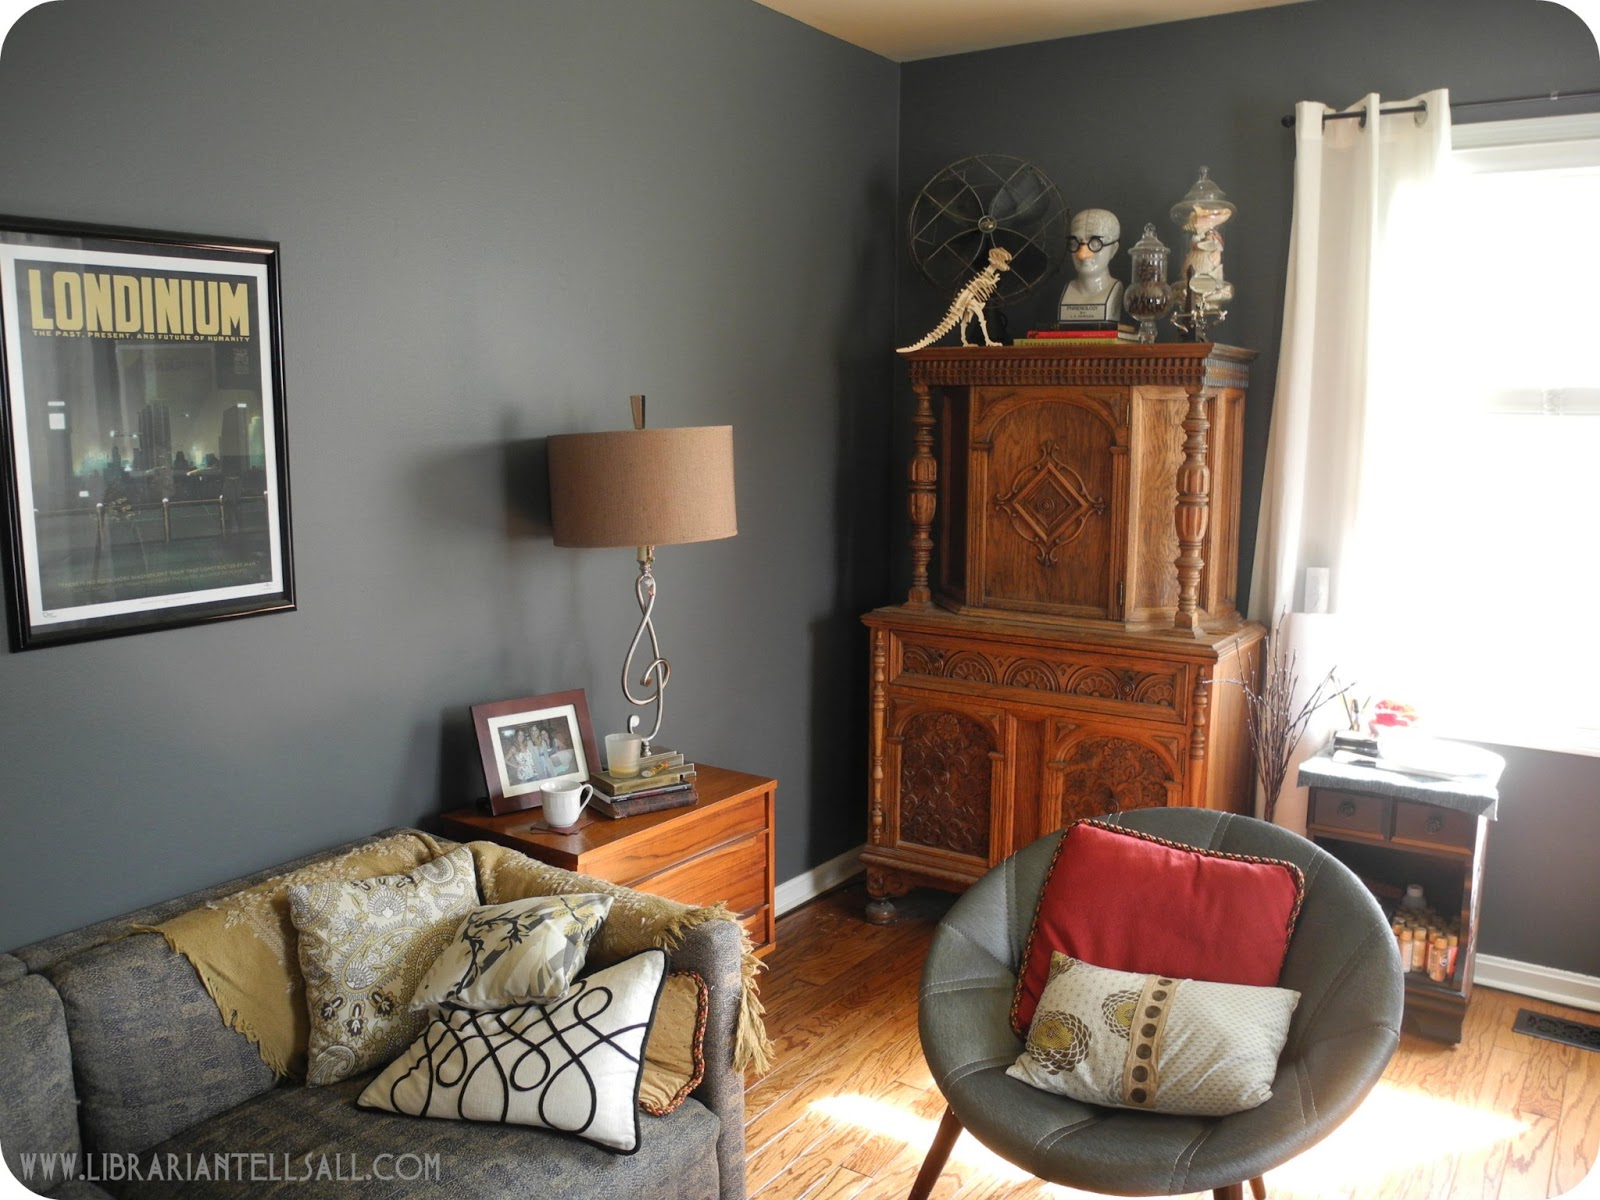 librarian tells all: My Happy Room: Mid Century Furniture, Gray ...